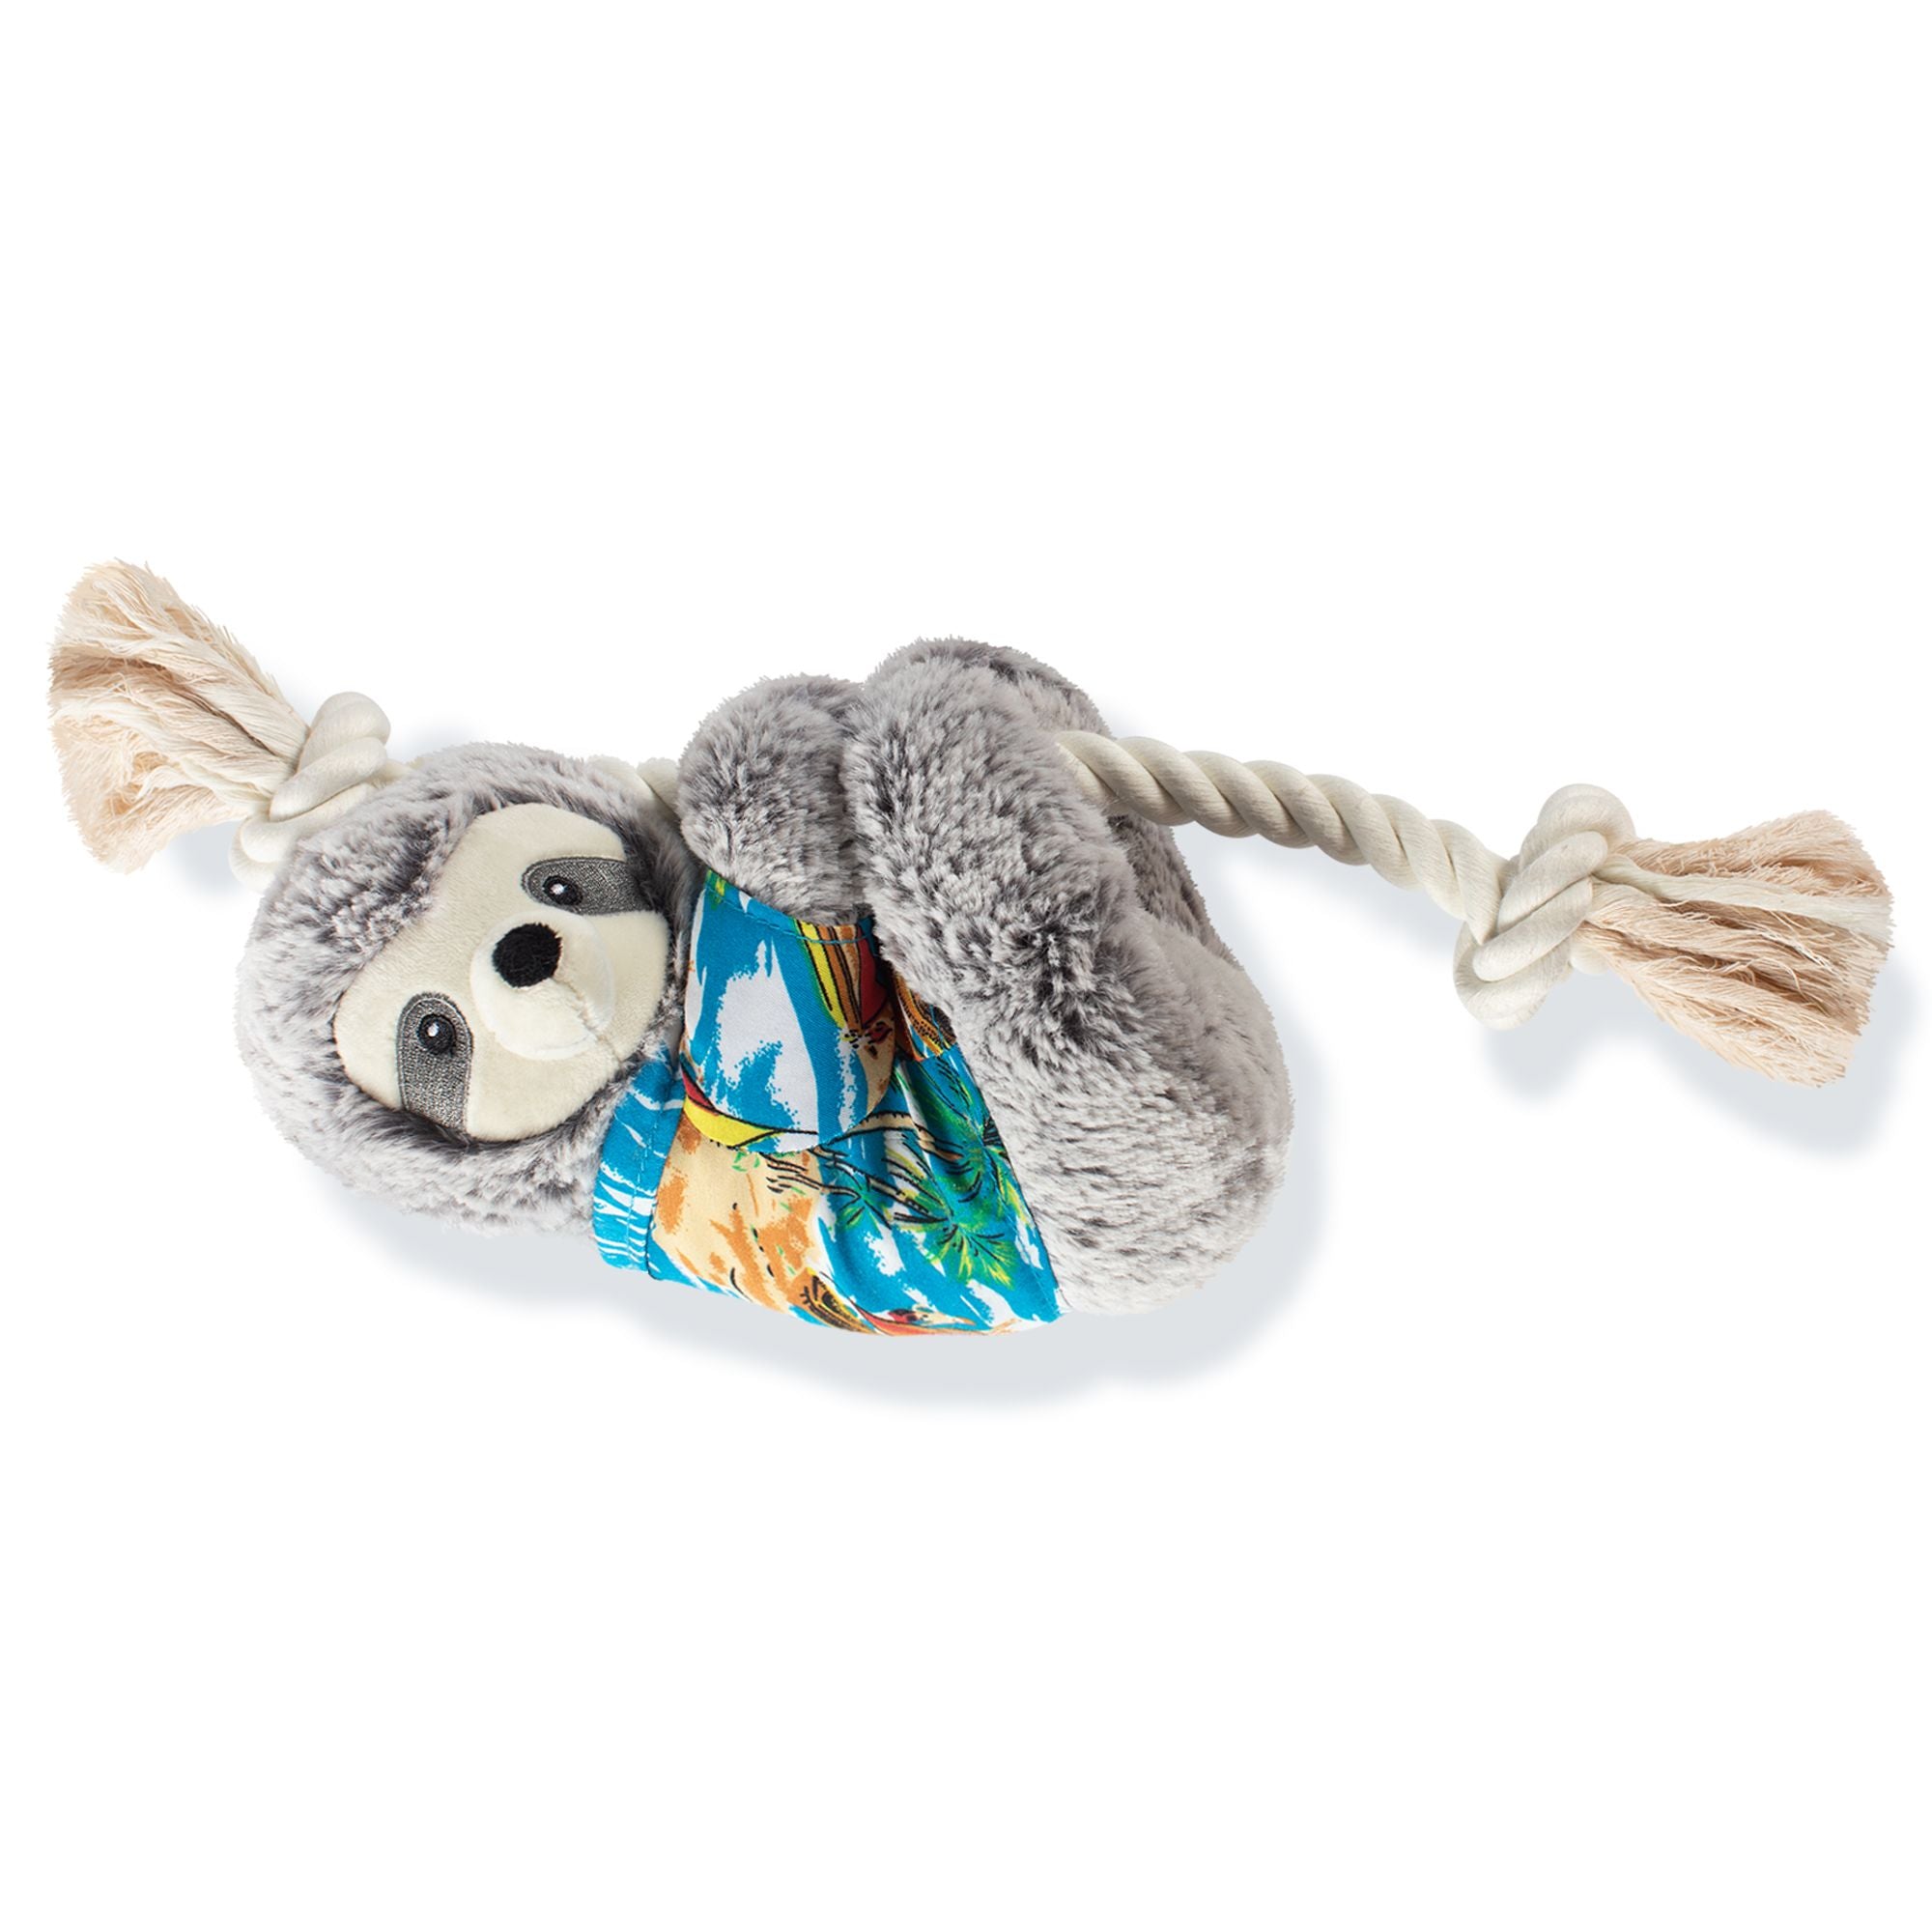 Fringe Studio PetShop Slown' Down For Summer  |  Squeaky Plush Toy